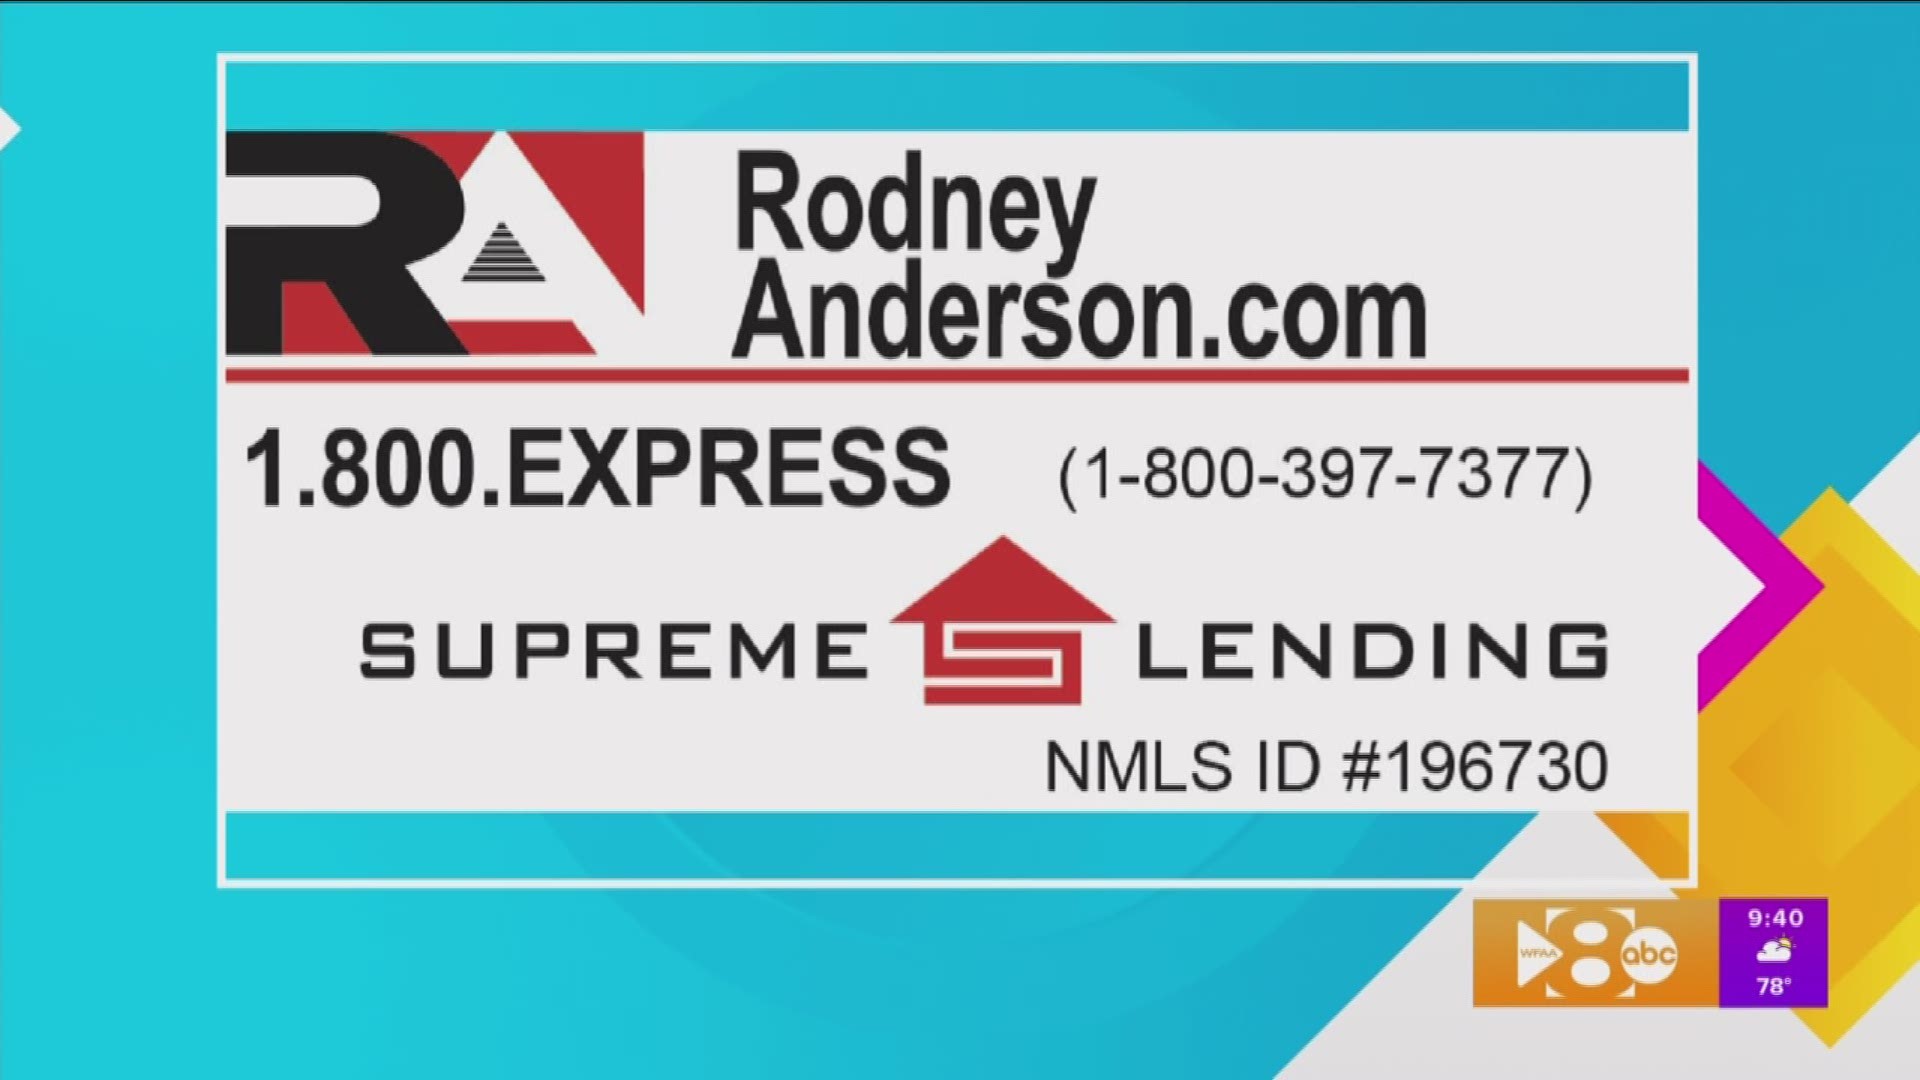 Call (800) EXPRESS for more information or go to www.rodneyanderson.com.